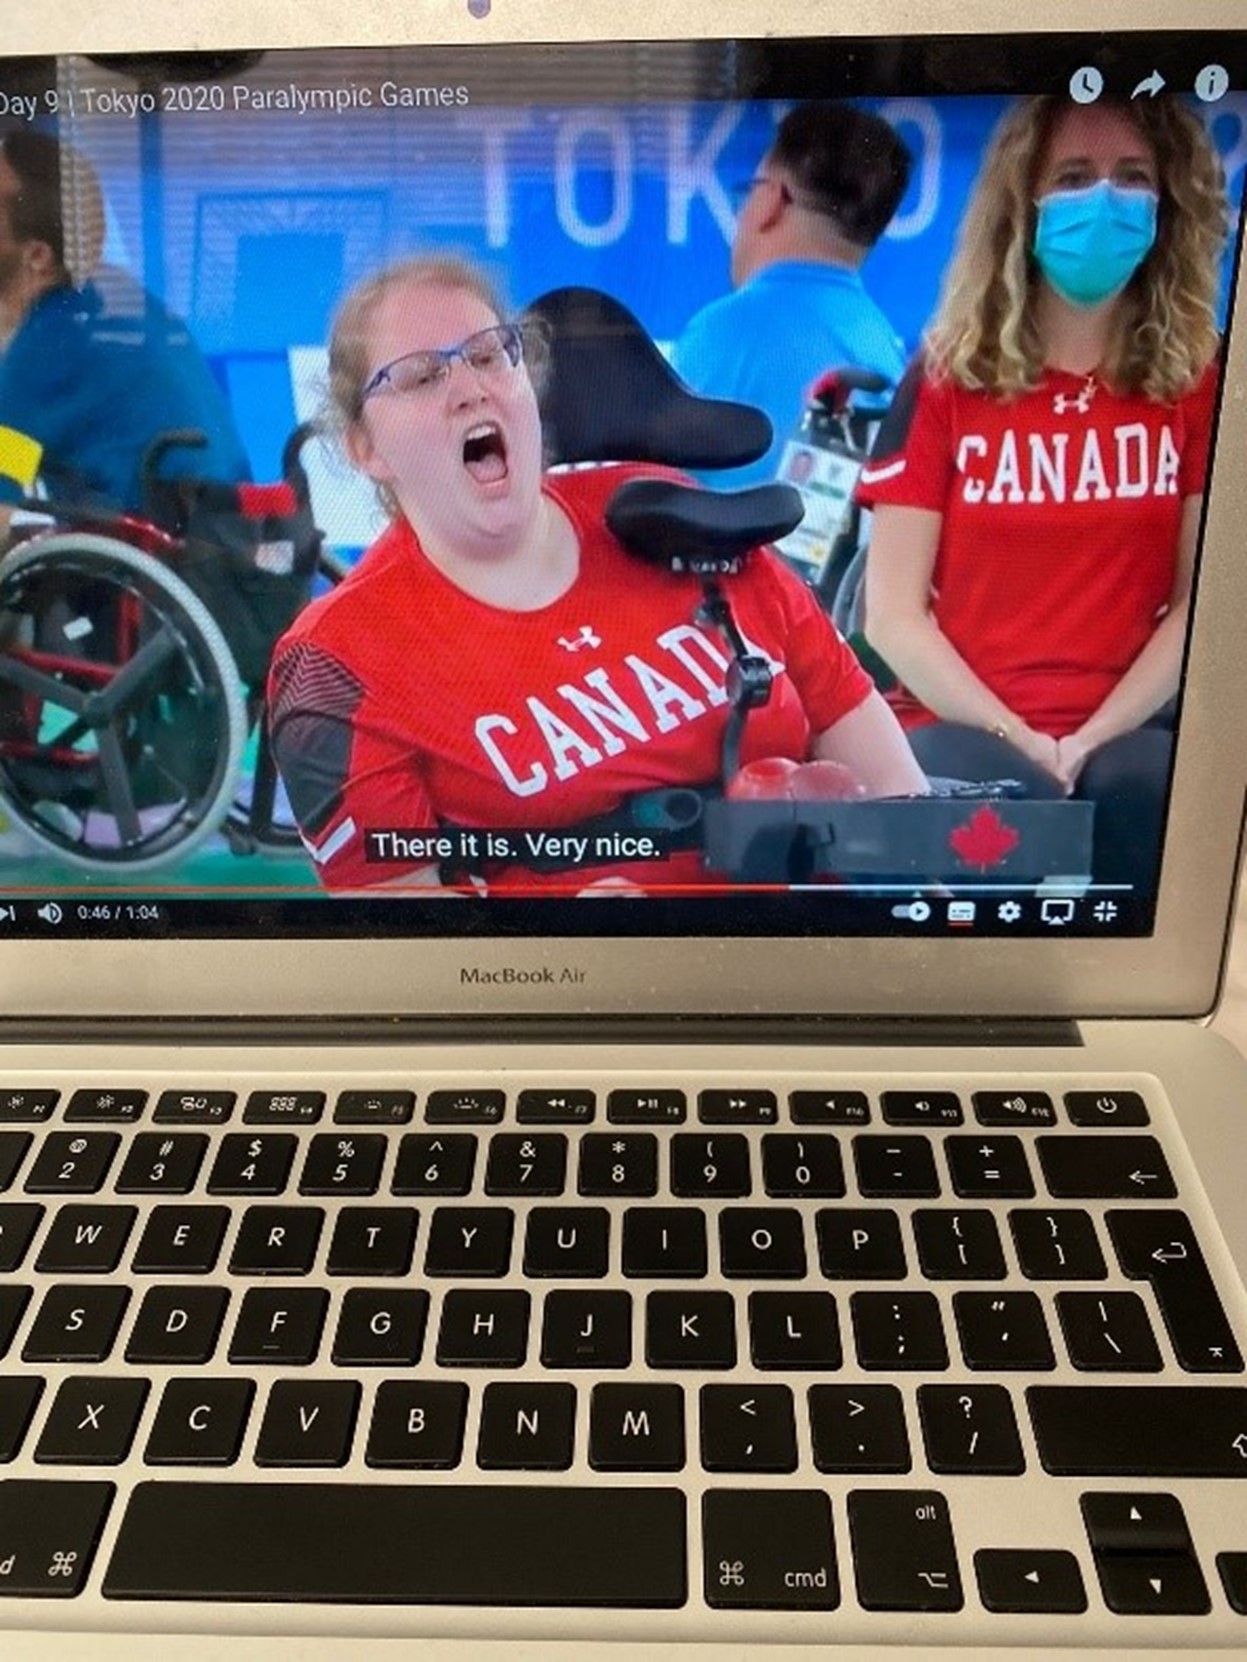 A laptop live streaming Alison Levine in boccia competition at the Tokyo 2020 Paralympic Games